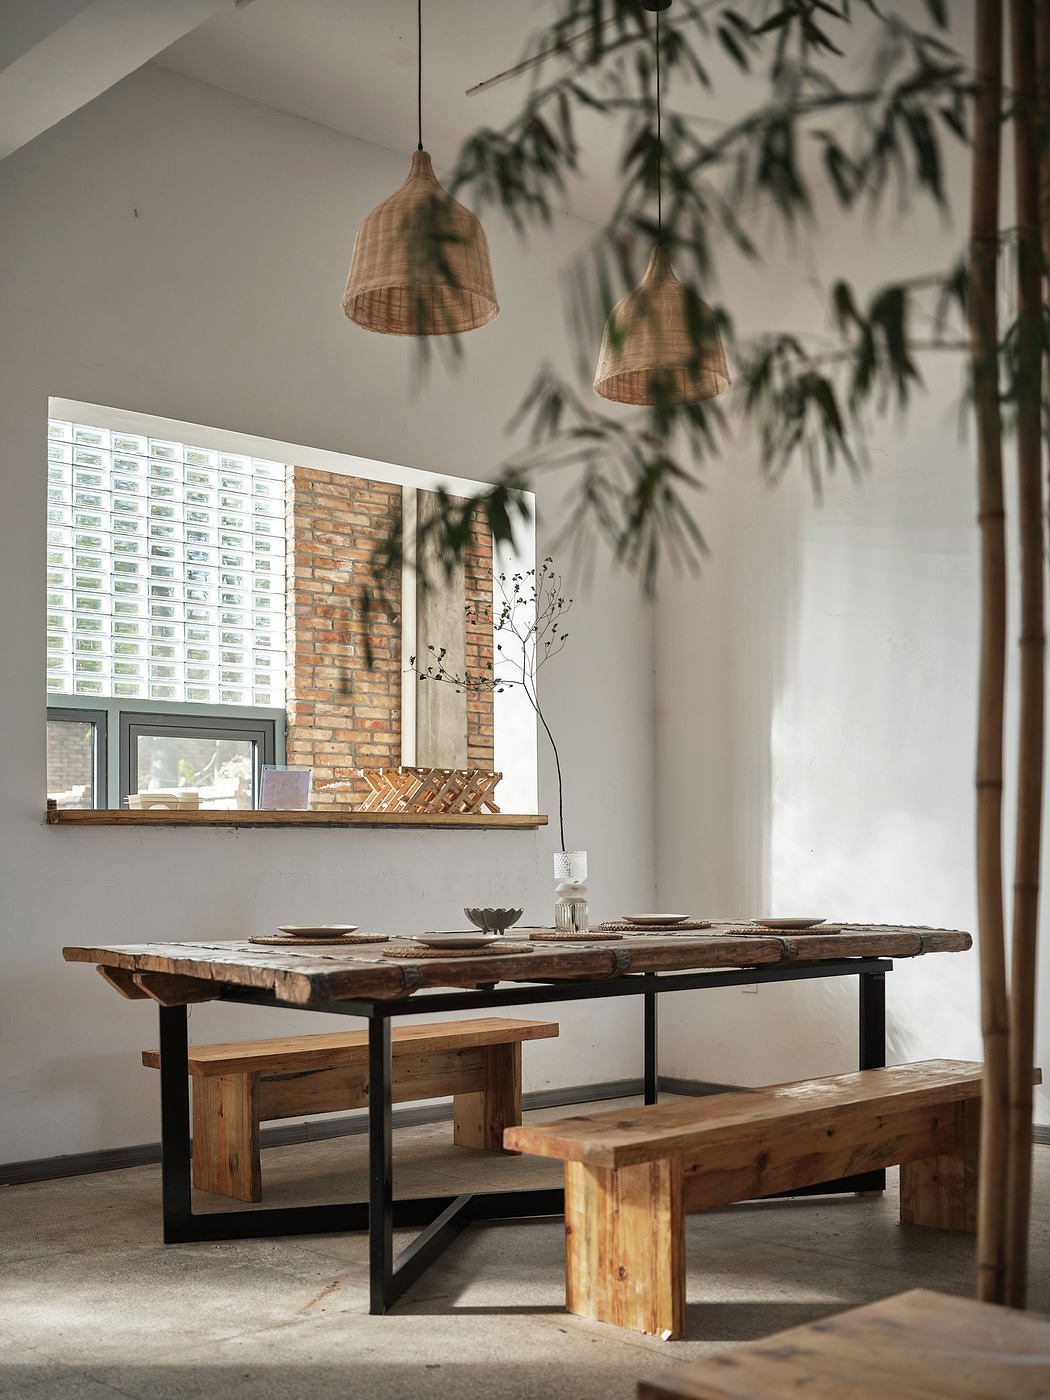 Minimalist dining room with wooden table, benches, and pendant lights.